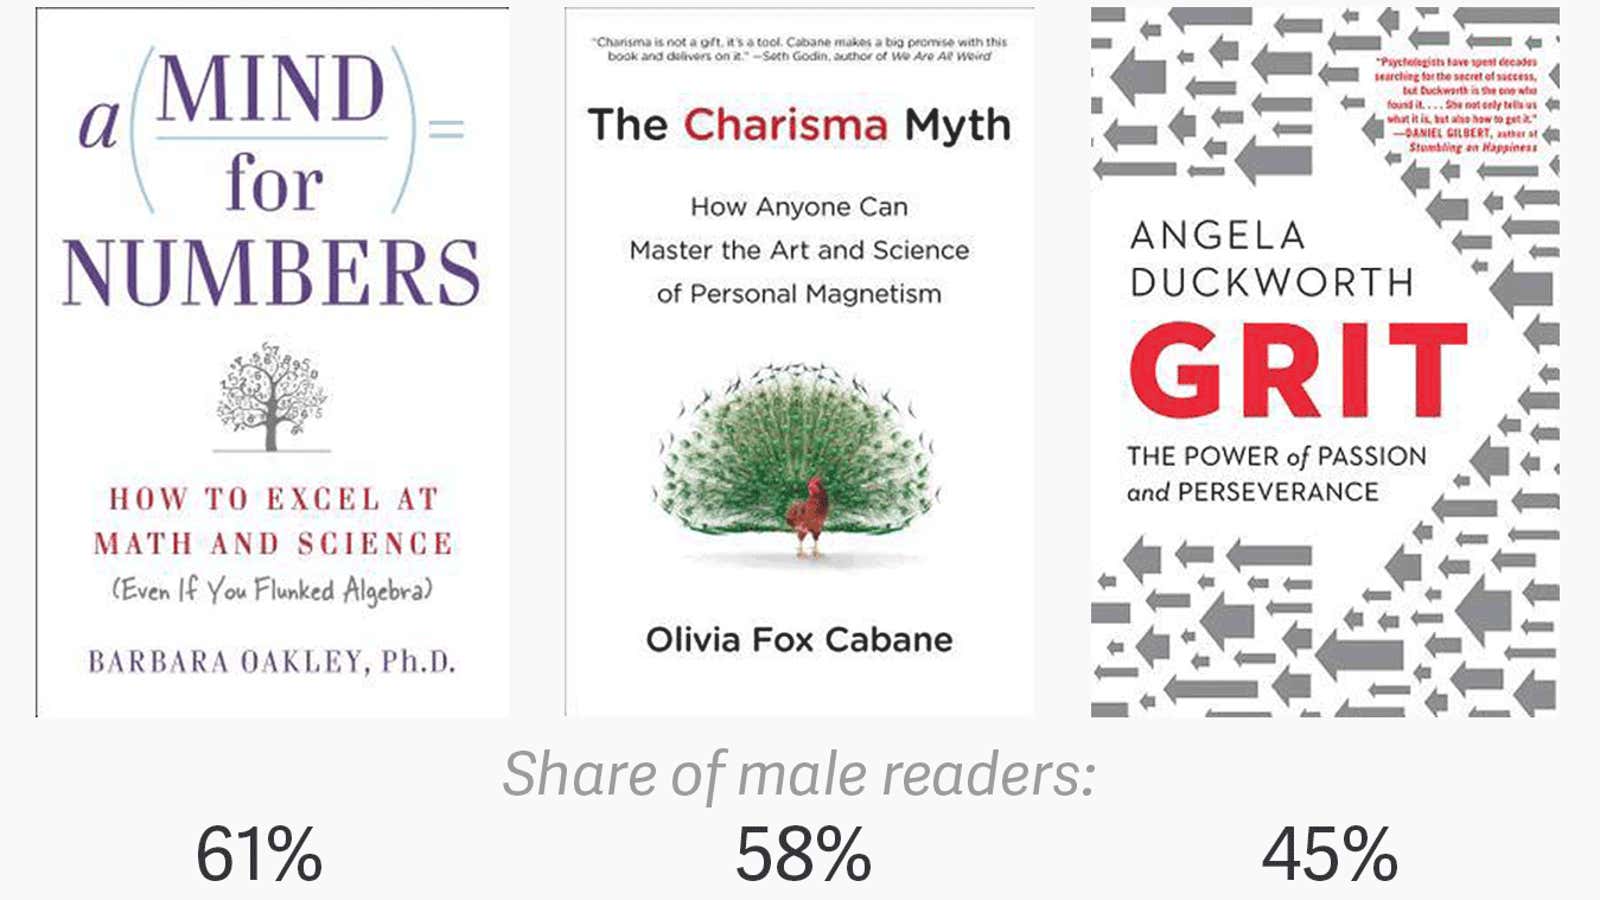 Goodreads data show that women reading self-help books are getting advice from men